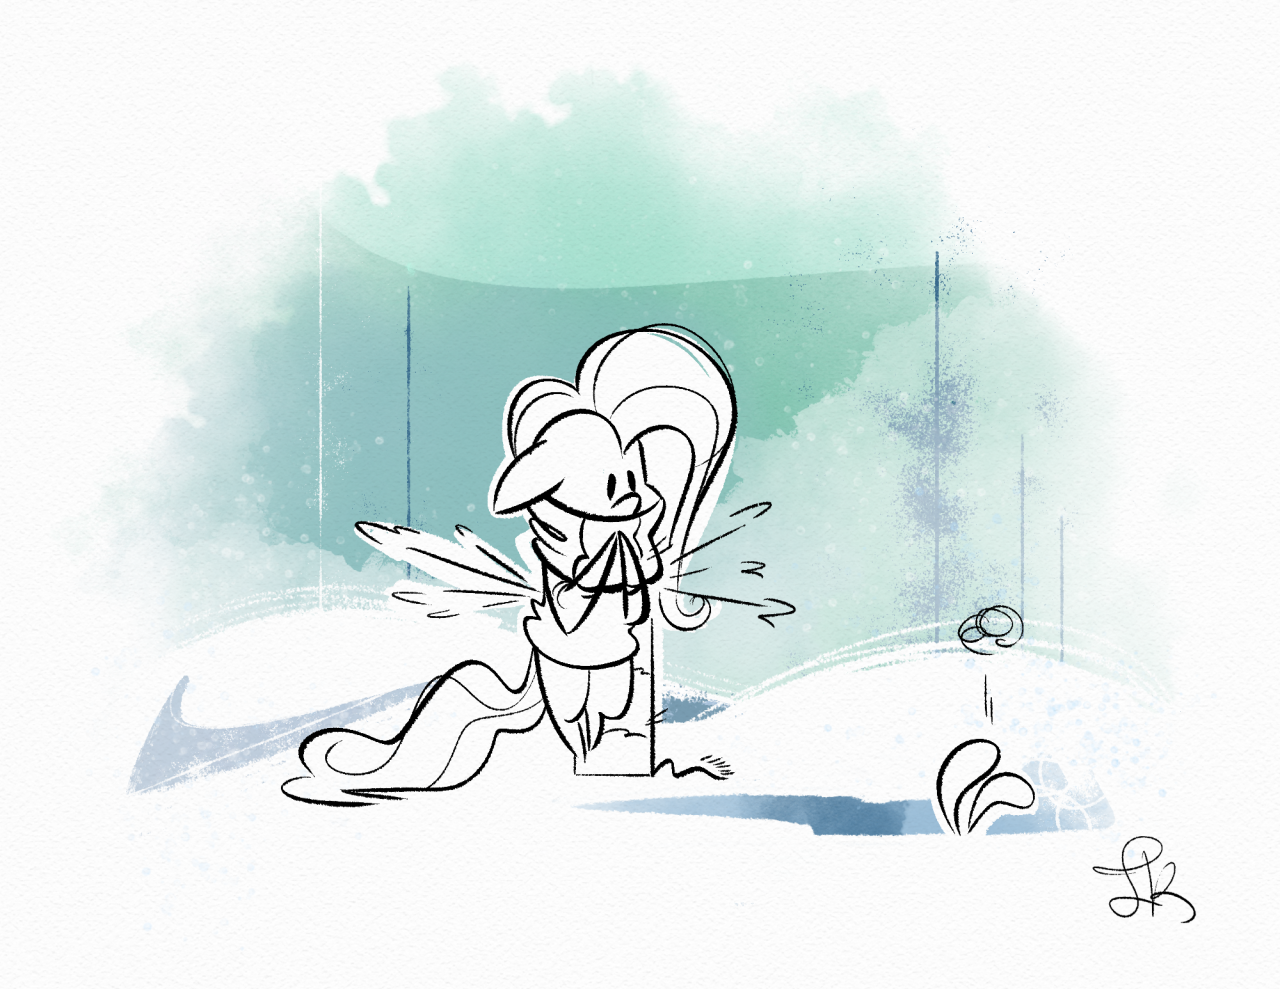 fluttershythekind: First Snow Fall  Goodness… You must watch out for those snow